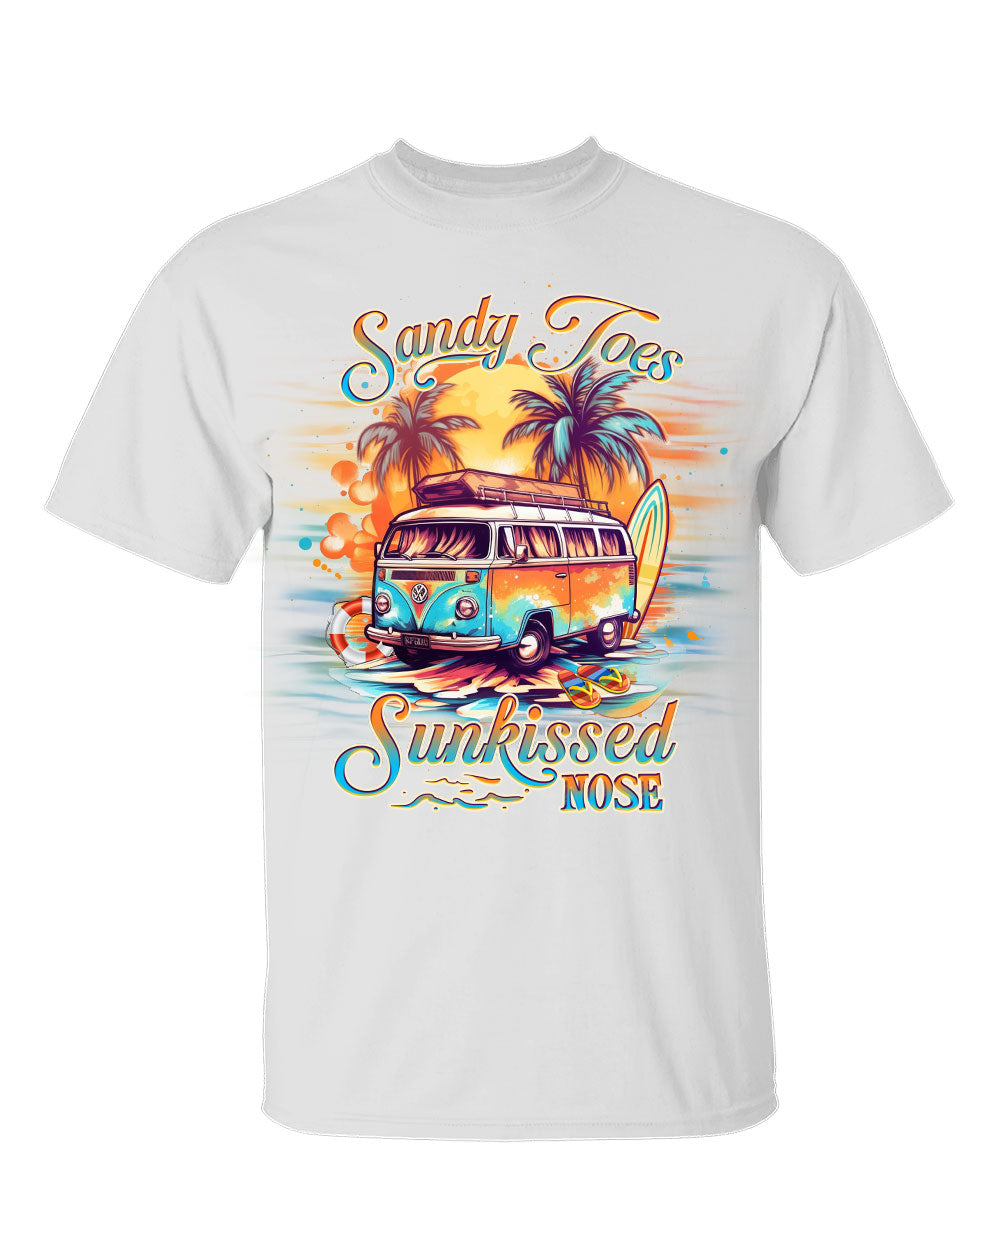 SANDY TOES SUNKISSED NOSE COTTON SHIRT - YHHG2405235